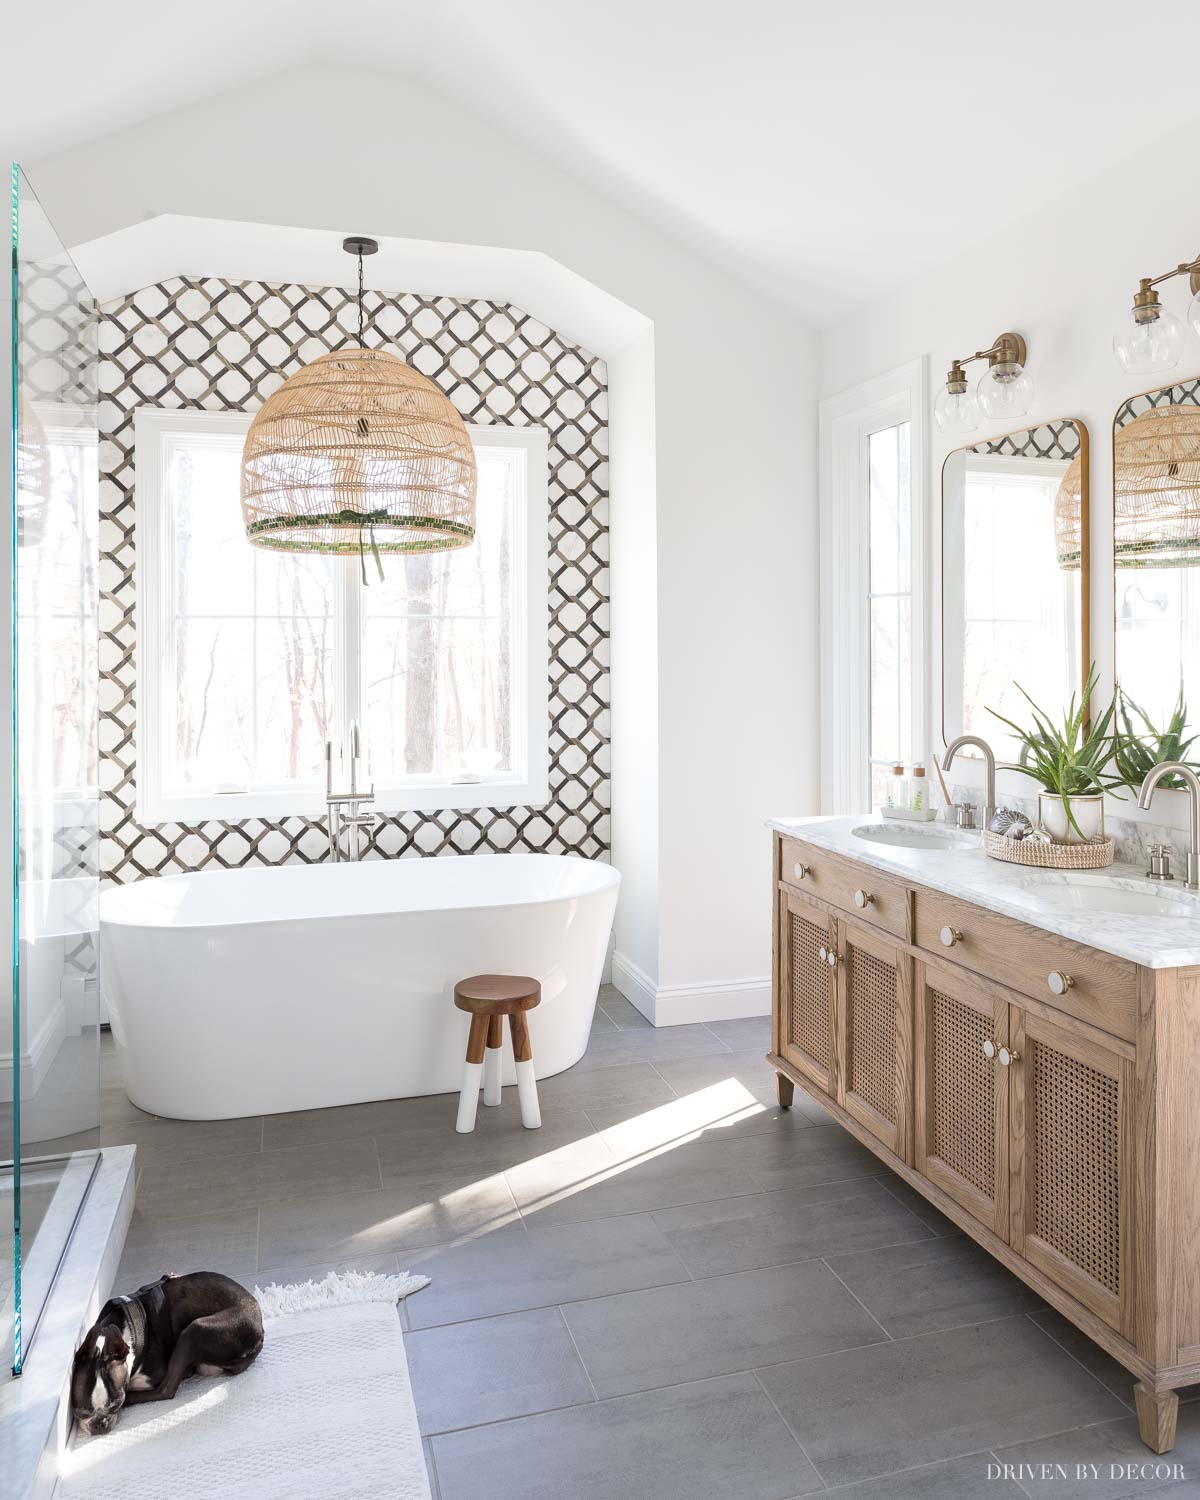 9 Of The Best Master Bathroom Must Haves? - Frei Remodeling